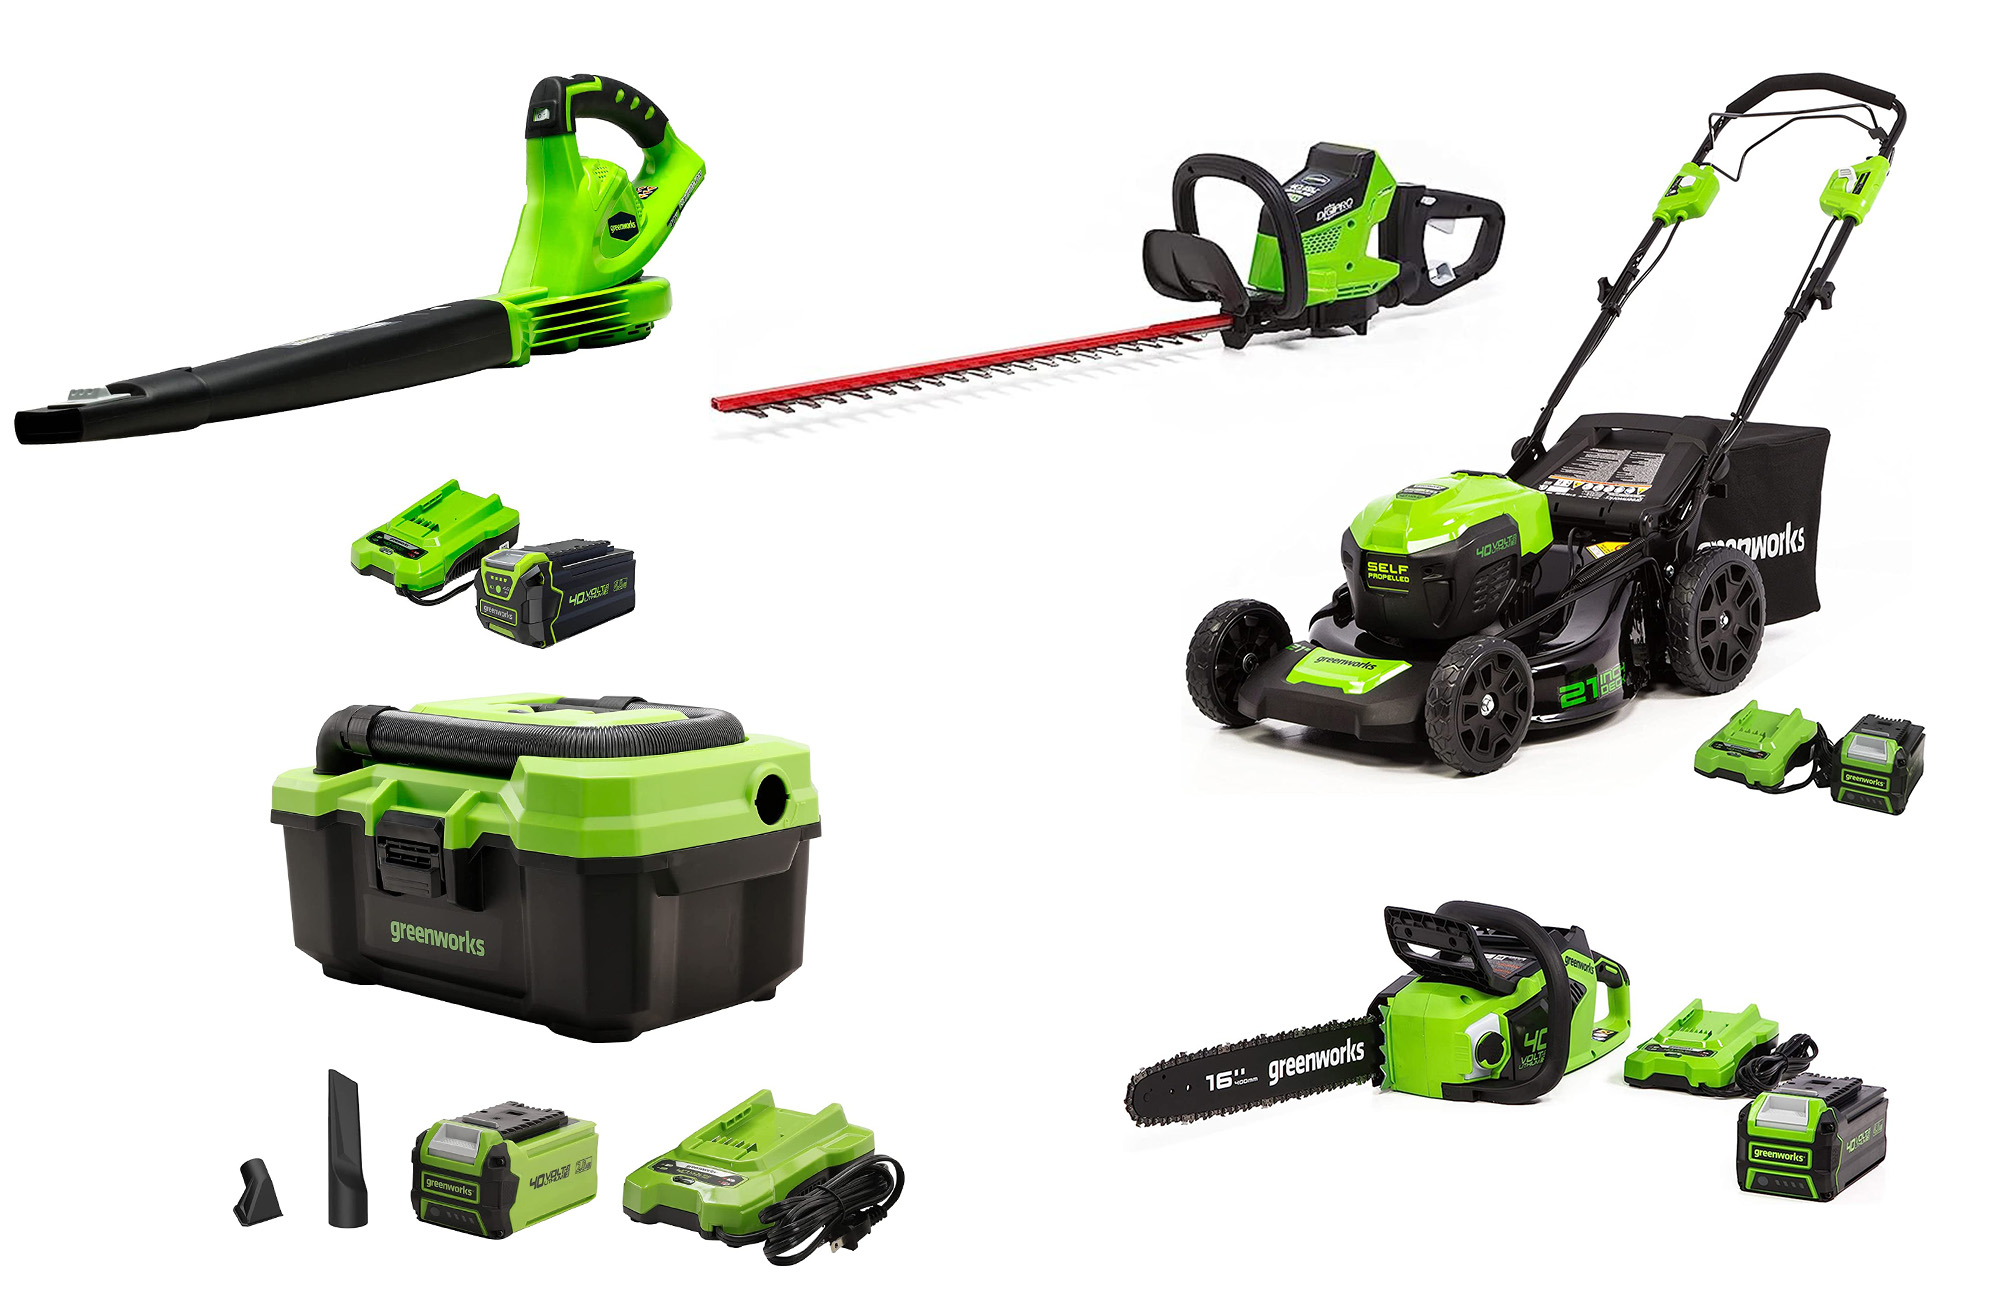 Don't miss these last-minute deals on electric lawn mowers and tools from  Greenworks this Prime Day